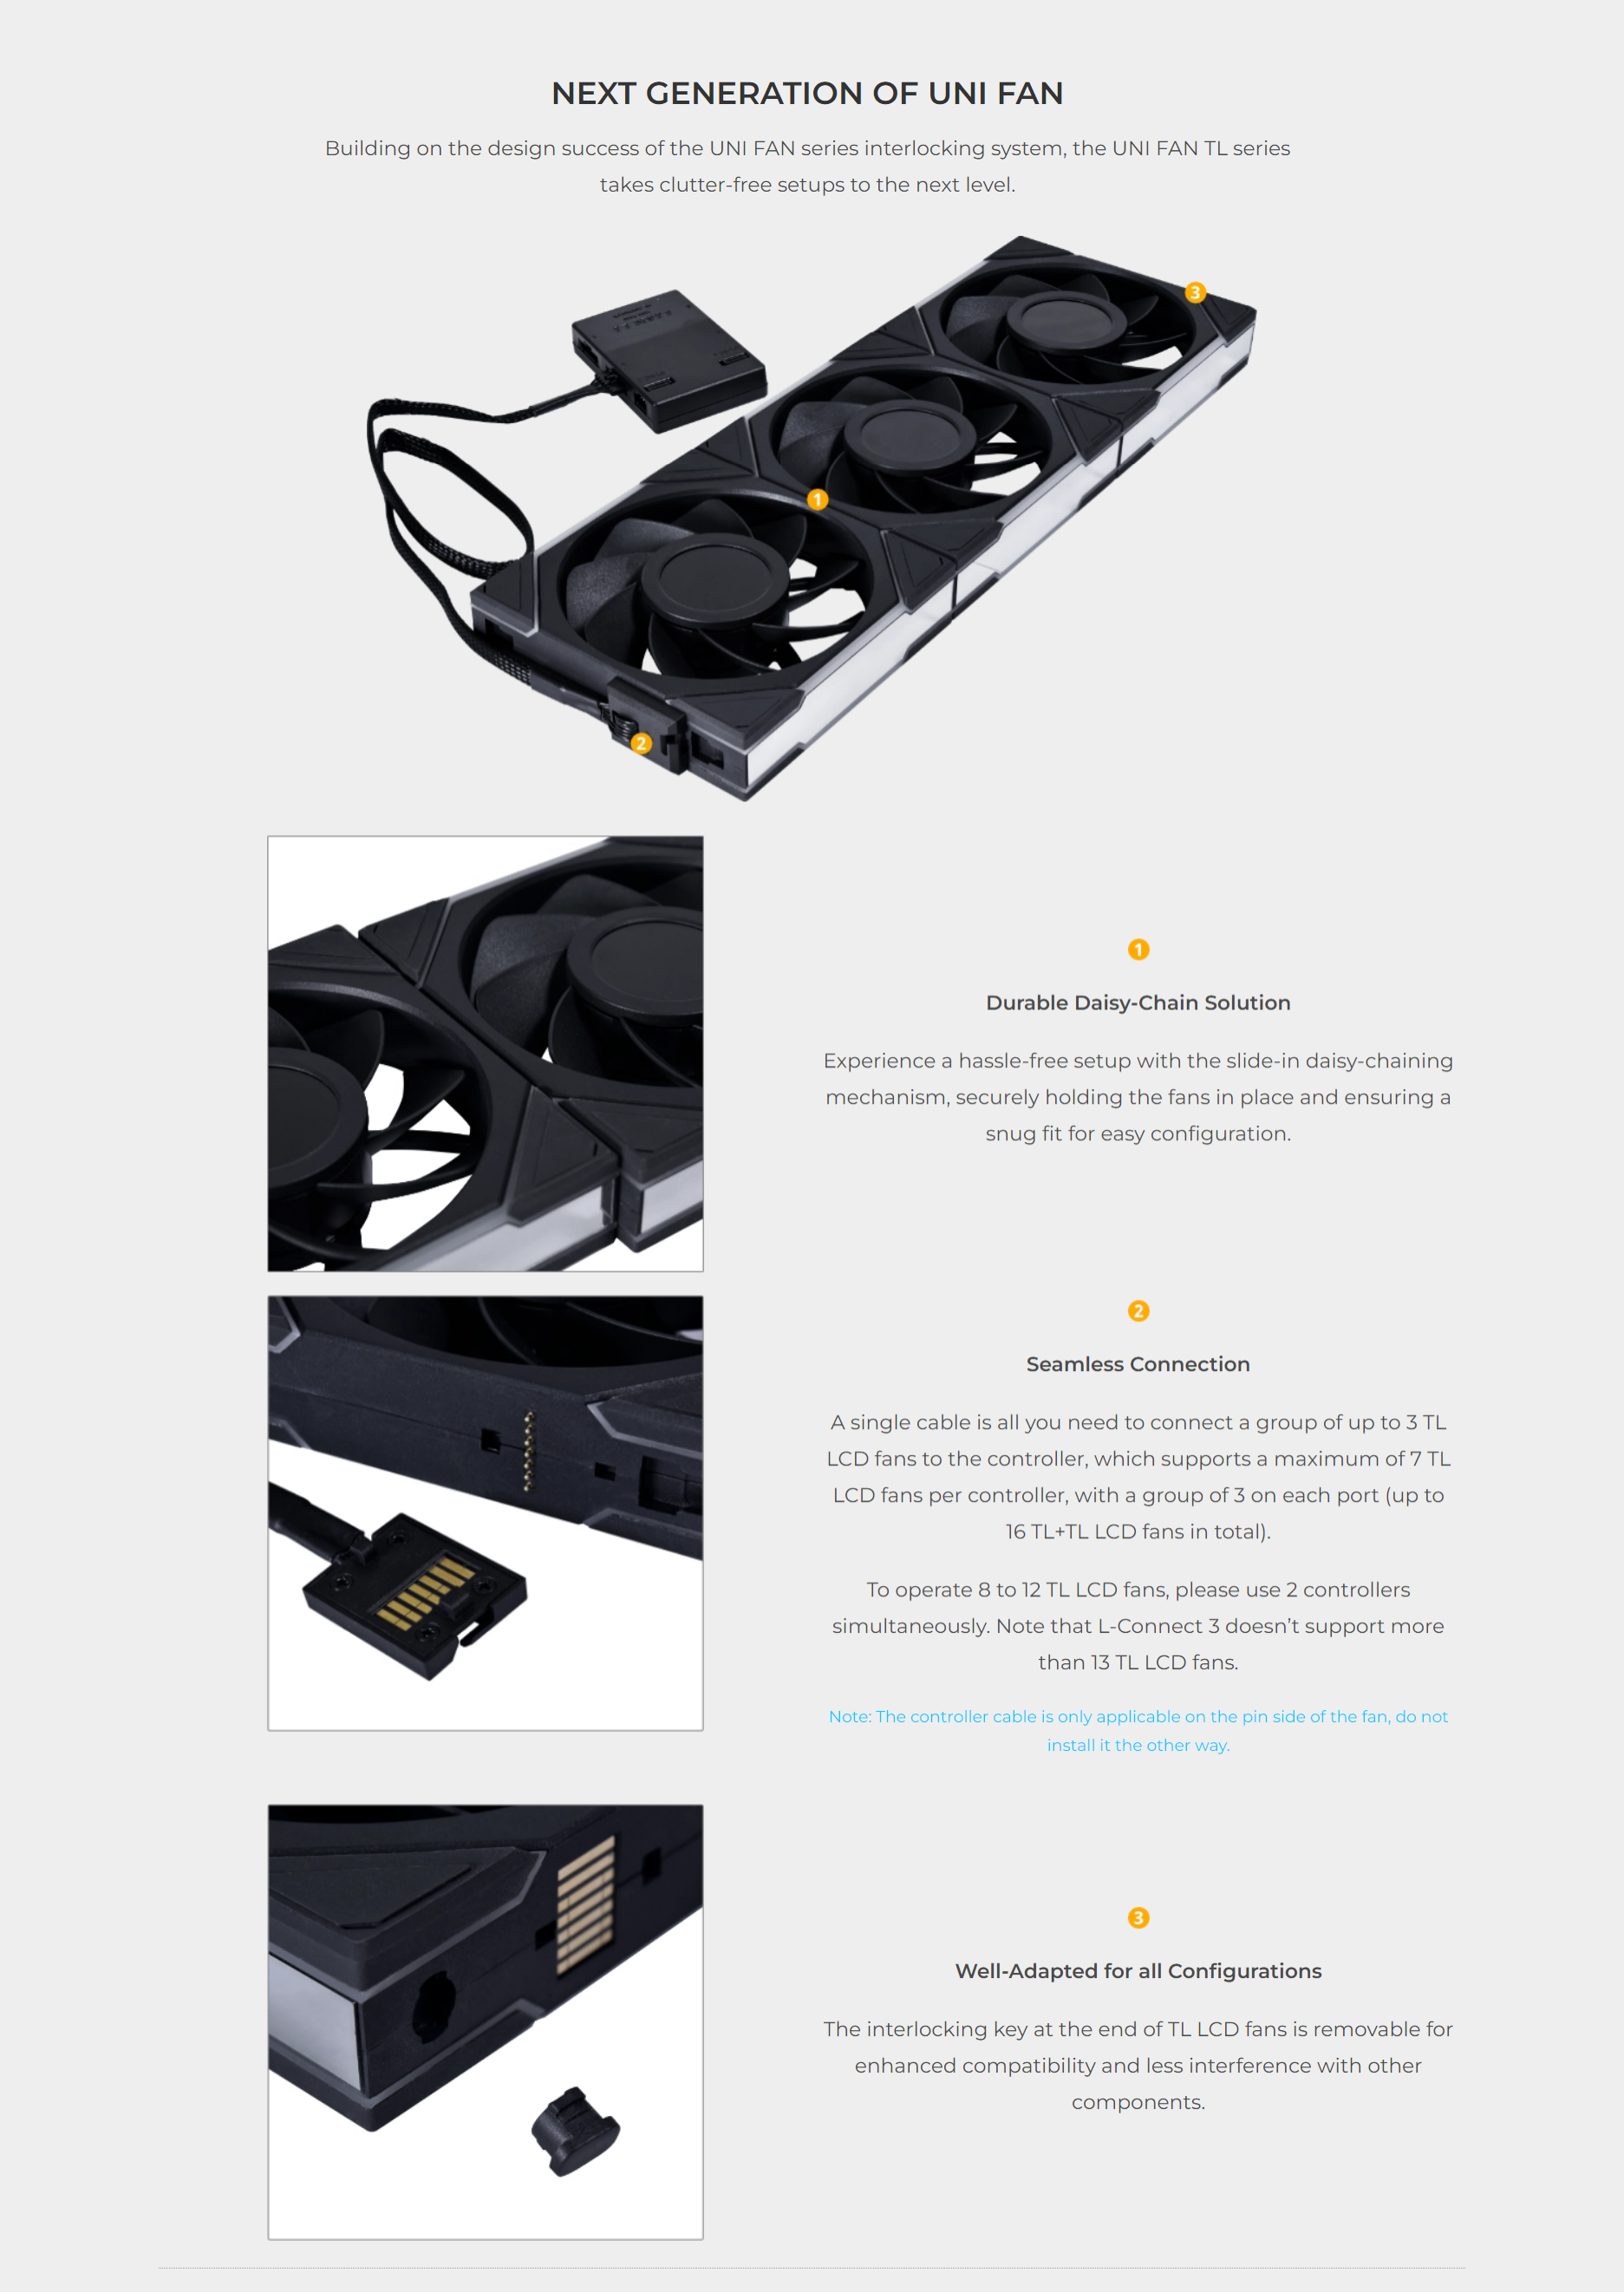 A large marketing image providing additional information about the product Lian Li UNI Fan TL LCD 120 Reverse Blade 120mm Fan Triple Pack - Black - Additional alt info not provided